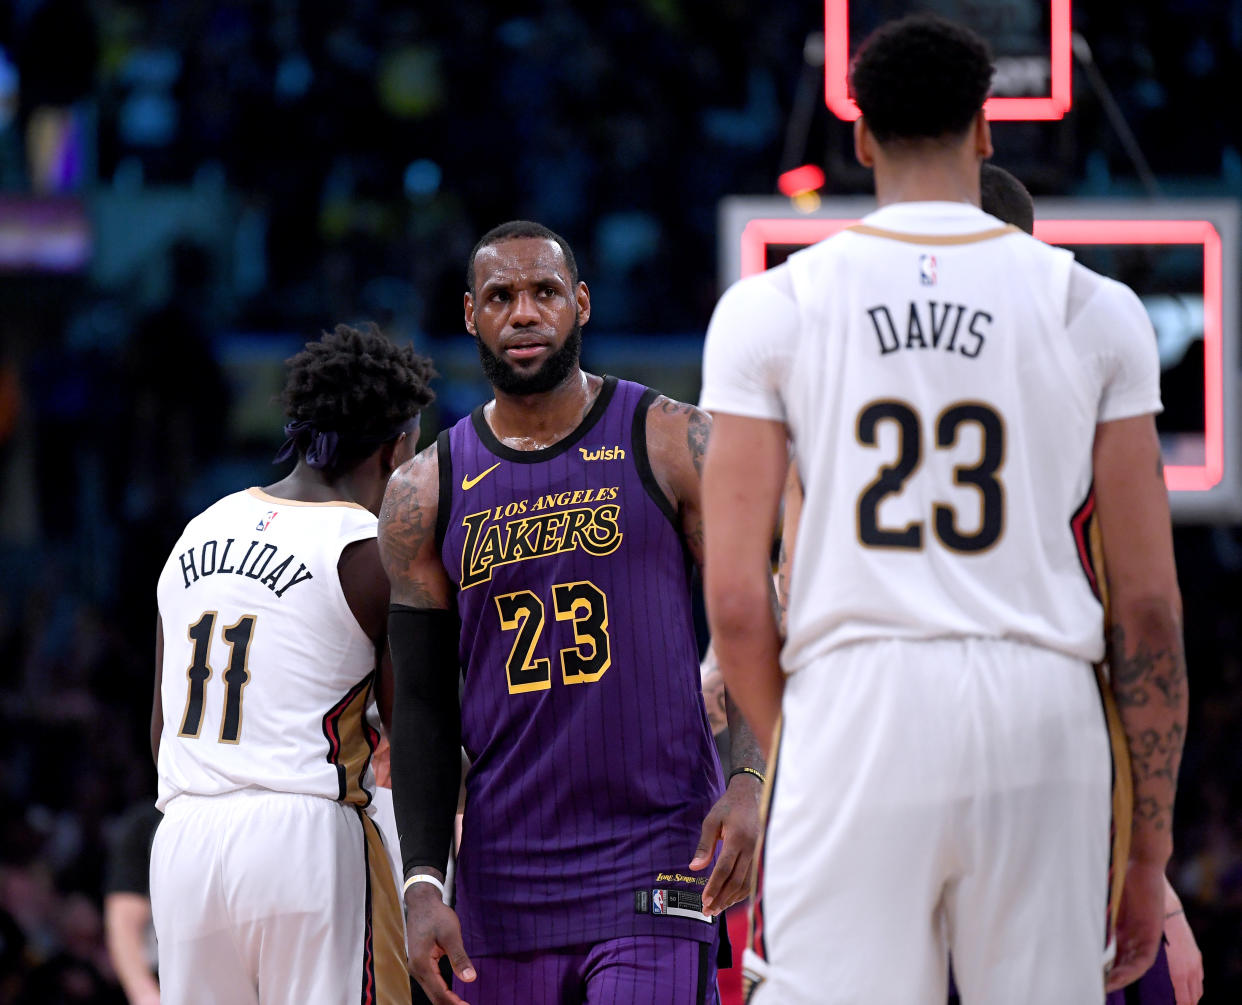 LOS ANGELES, CALIFORNIA - DECEMBER 21:  LeBron James #23 of the Los Angeles Lakers reacts in front of Anthony Davis #23 of the New Orleans Pelicans after a 112-104 Laker win at Staples Center on December 21, 2018 in Los Angeles, California.  NOTE TO USER: User expressly acknowledges and agrees that, by downloading and or using this photograph, User is consenting to the terms and conditions of the Getty Images License Agreement. (Photo by Harry How/Getty Images)